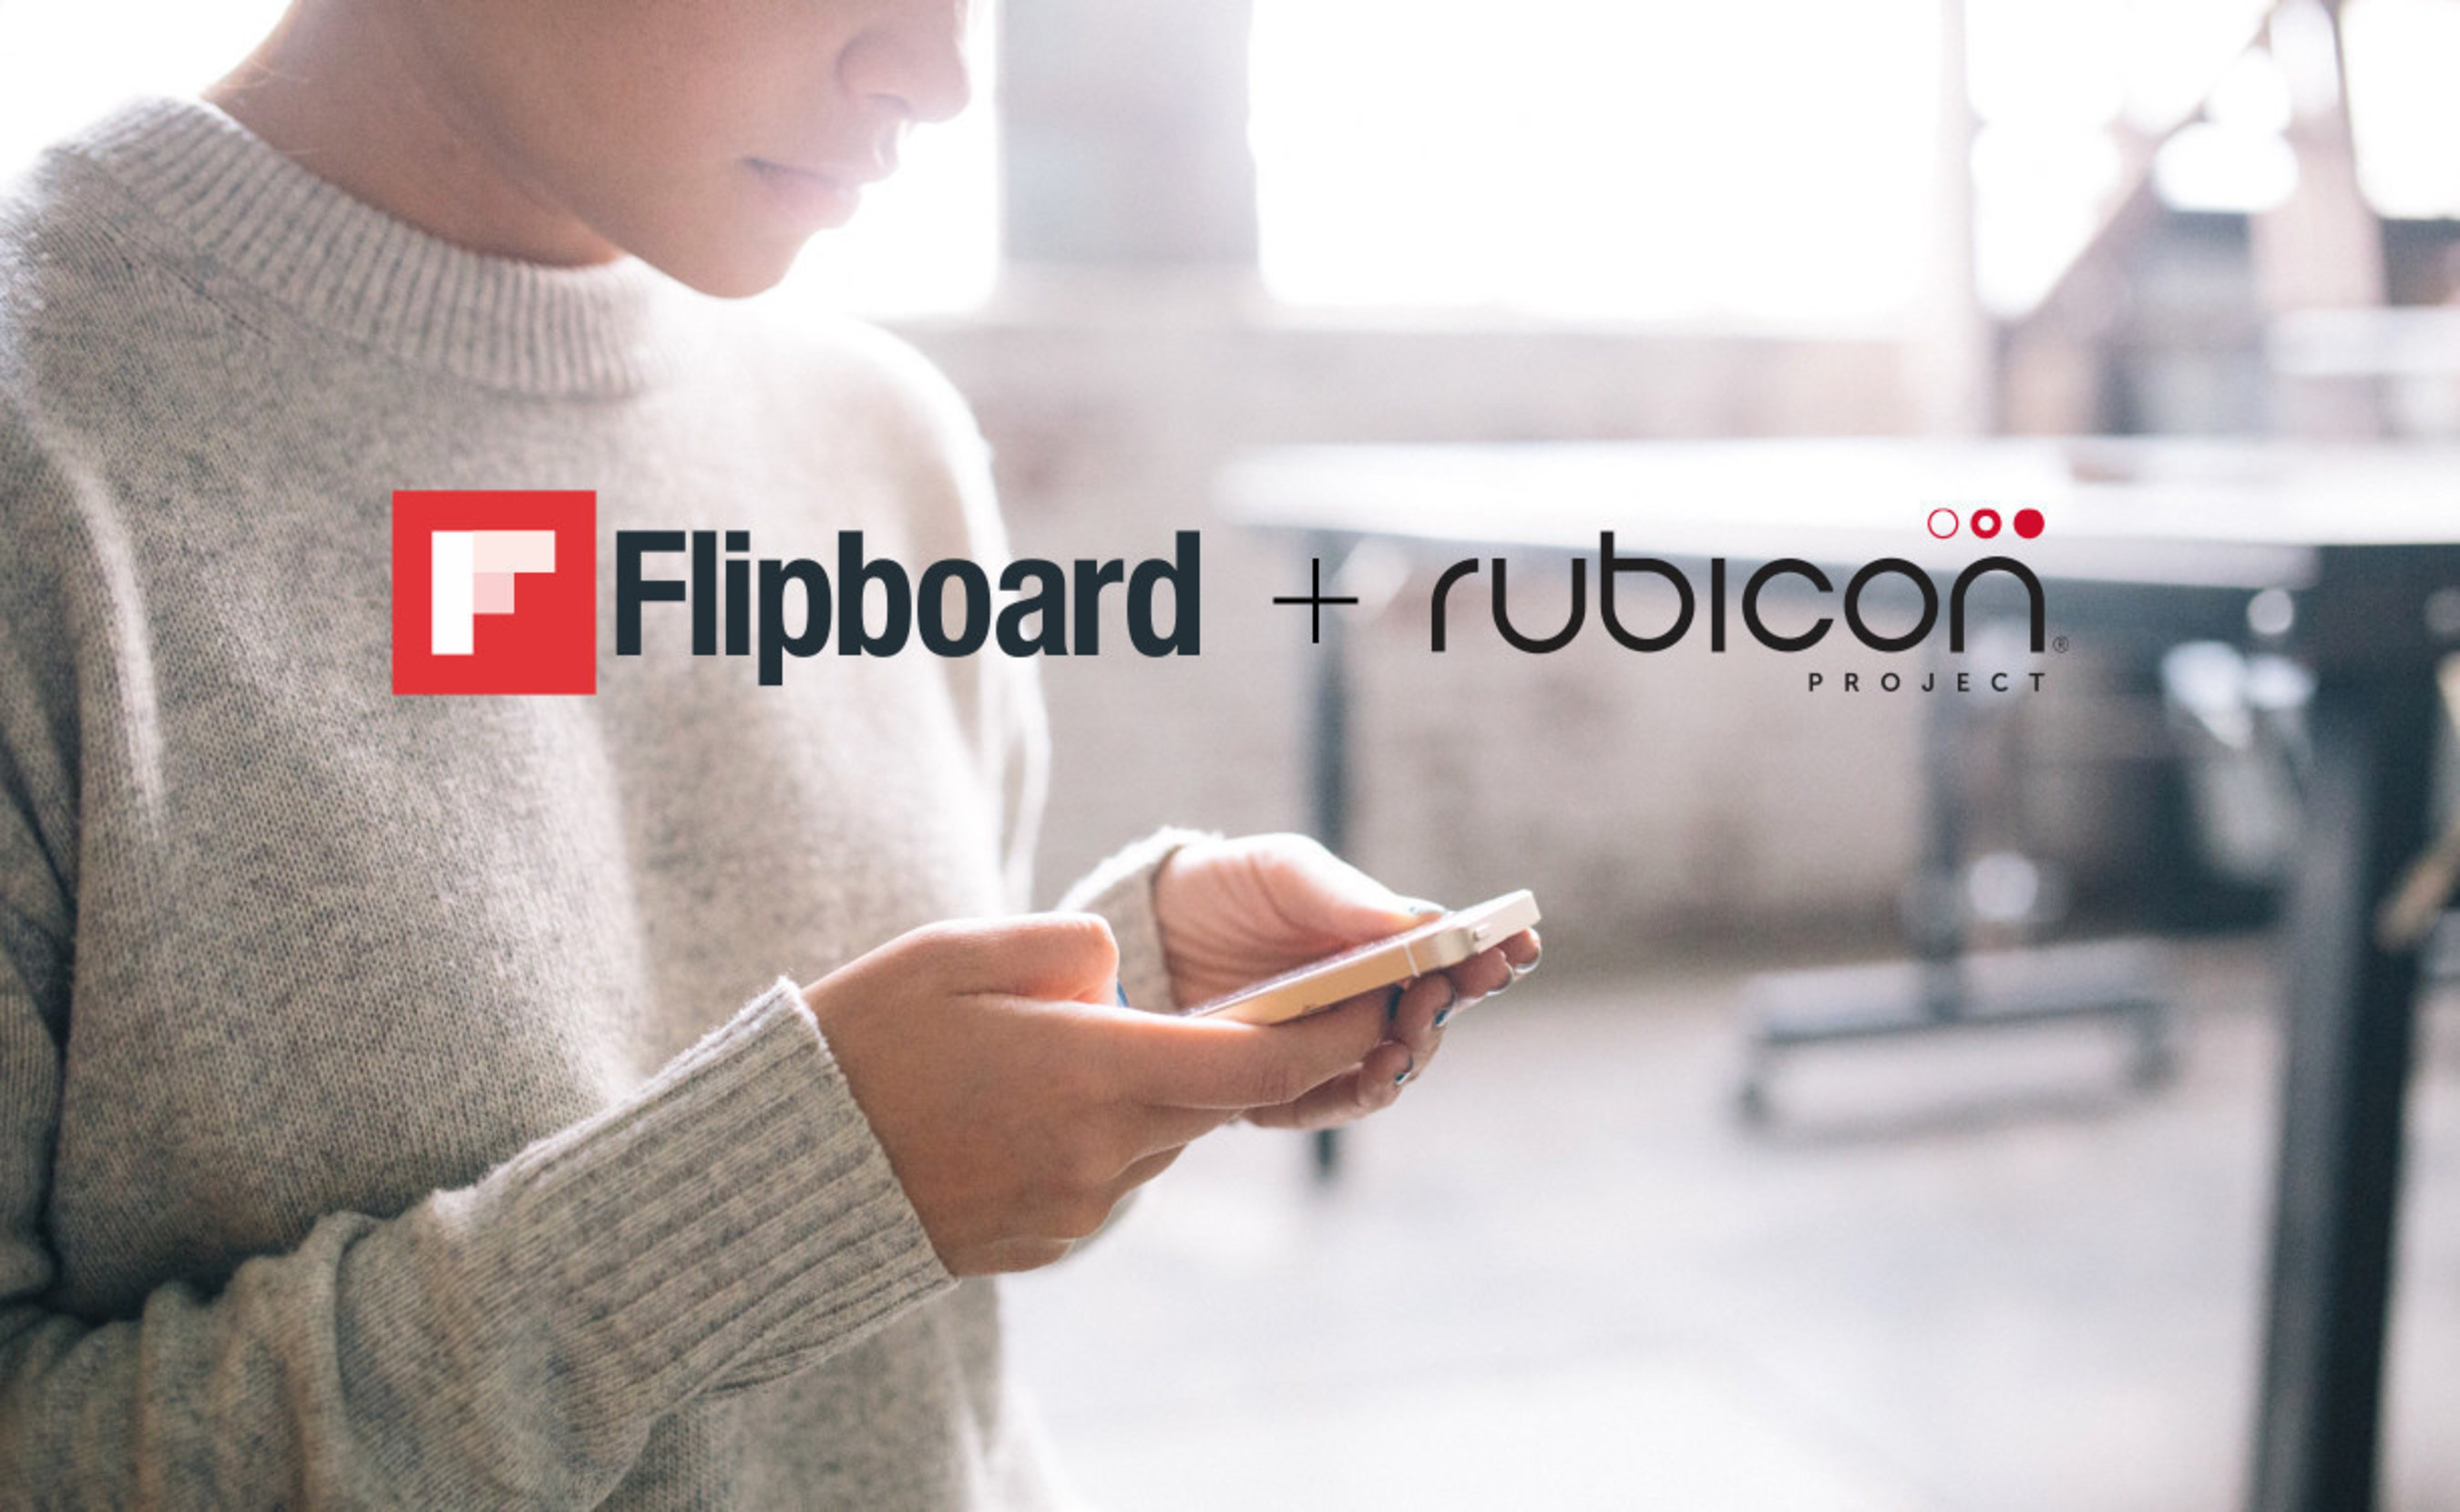 For the first time, Flipboard makes its mobile ad inventory available for real-time buying through an invite-only Private Marketplace (PMP) enabled by a new strategic alliance with Rubicon Project.  Rubicon Project's technology gives premium advertisers access to Flipboard's highly engaged 90 million monthly active users;  Flipboard's audience is comprised of equal parts Millennials, Gen-X and Baby Boomers.